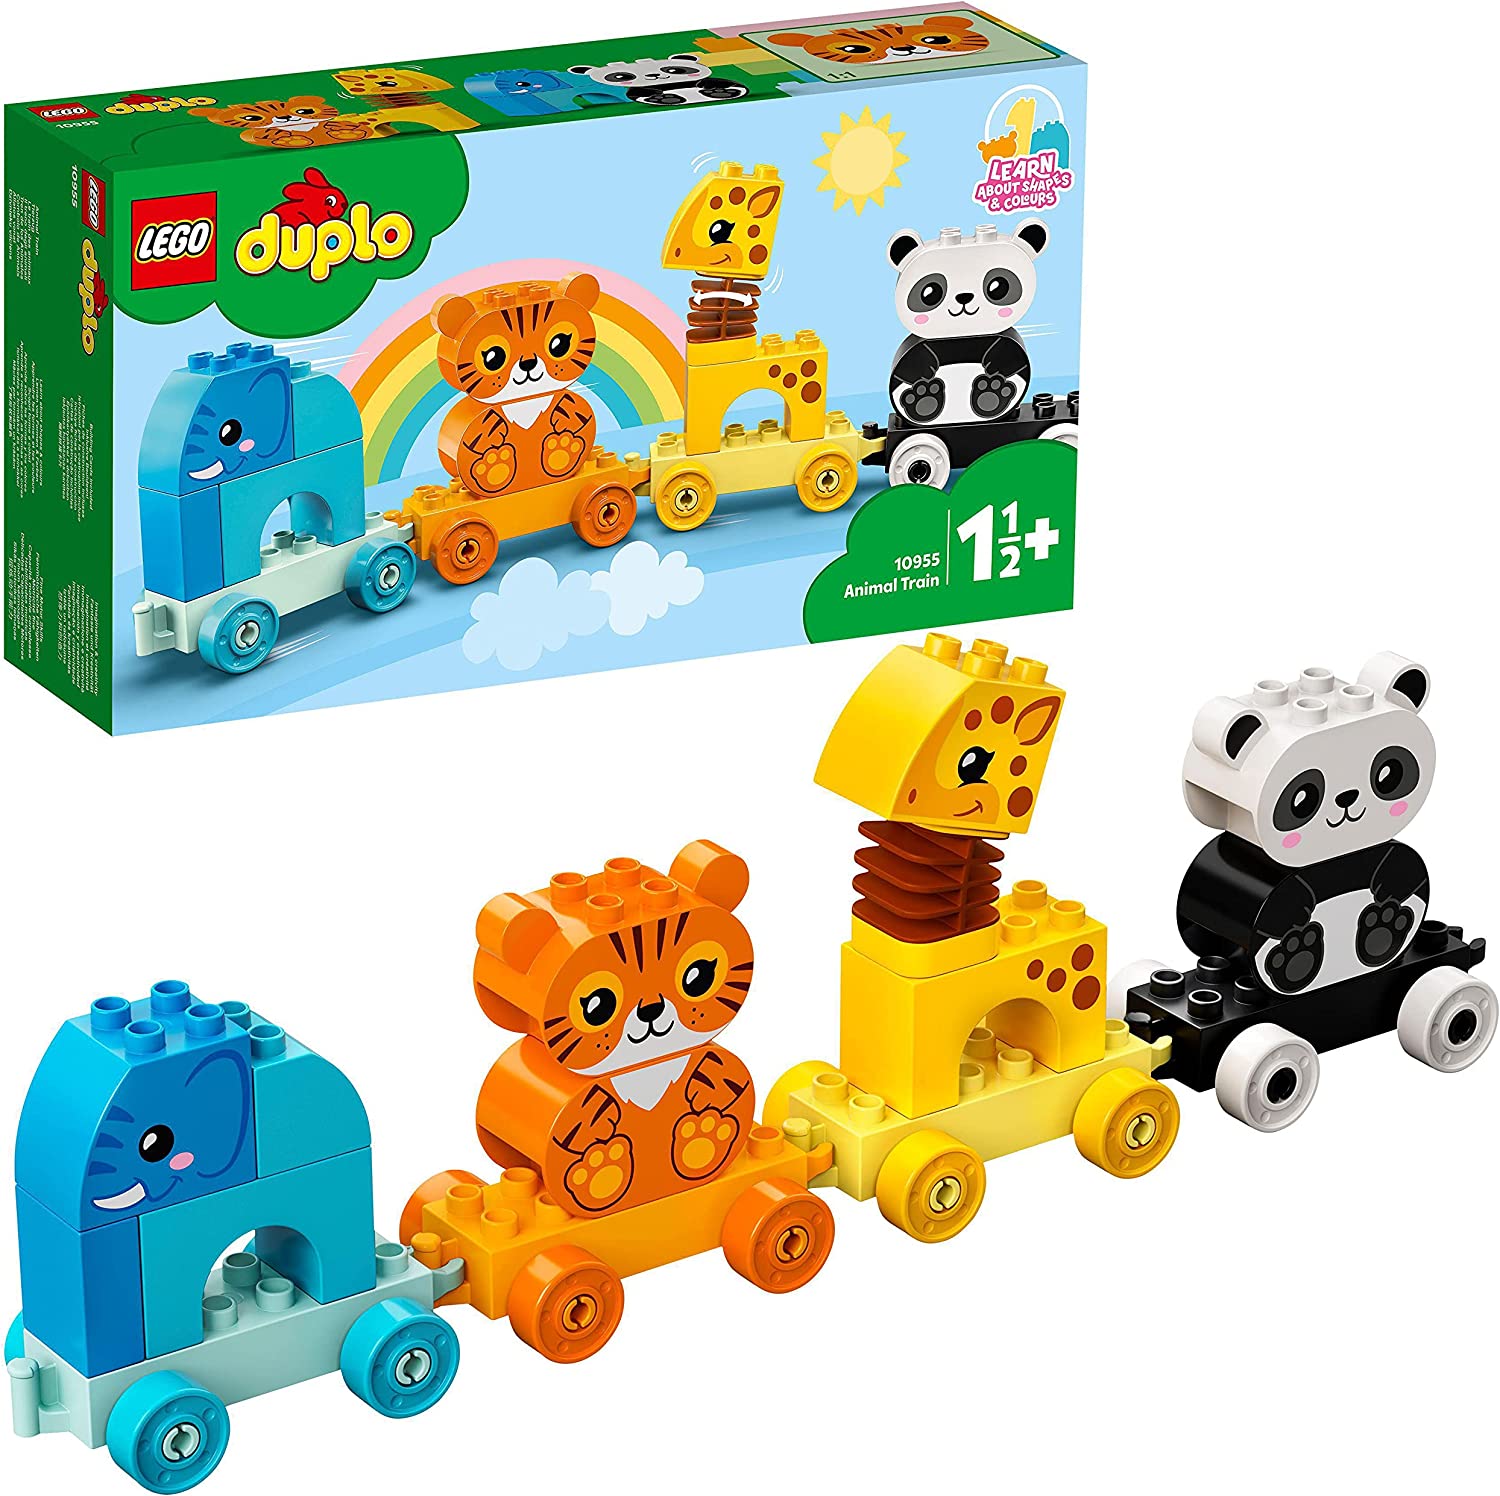 Lego Duplo 10955 My First Animal Train with Elephants, Tiger, Panda and Giraffe for 1.5 Years Old Toddlers